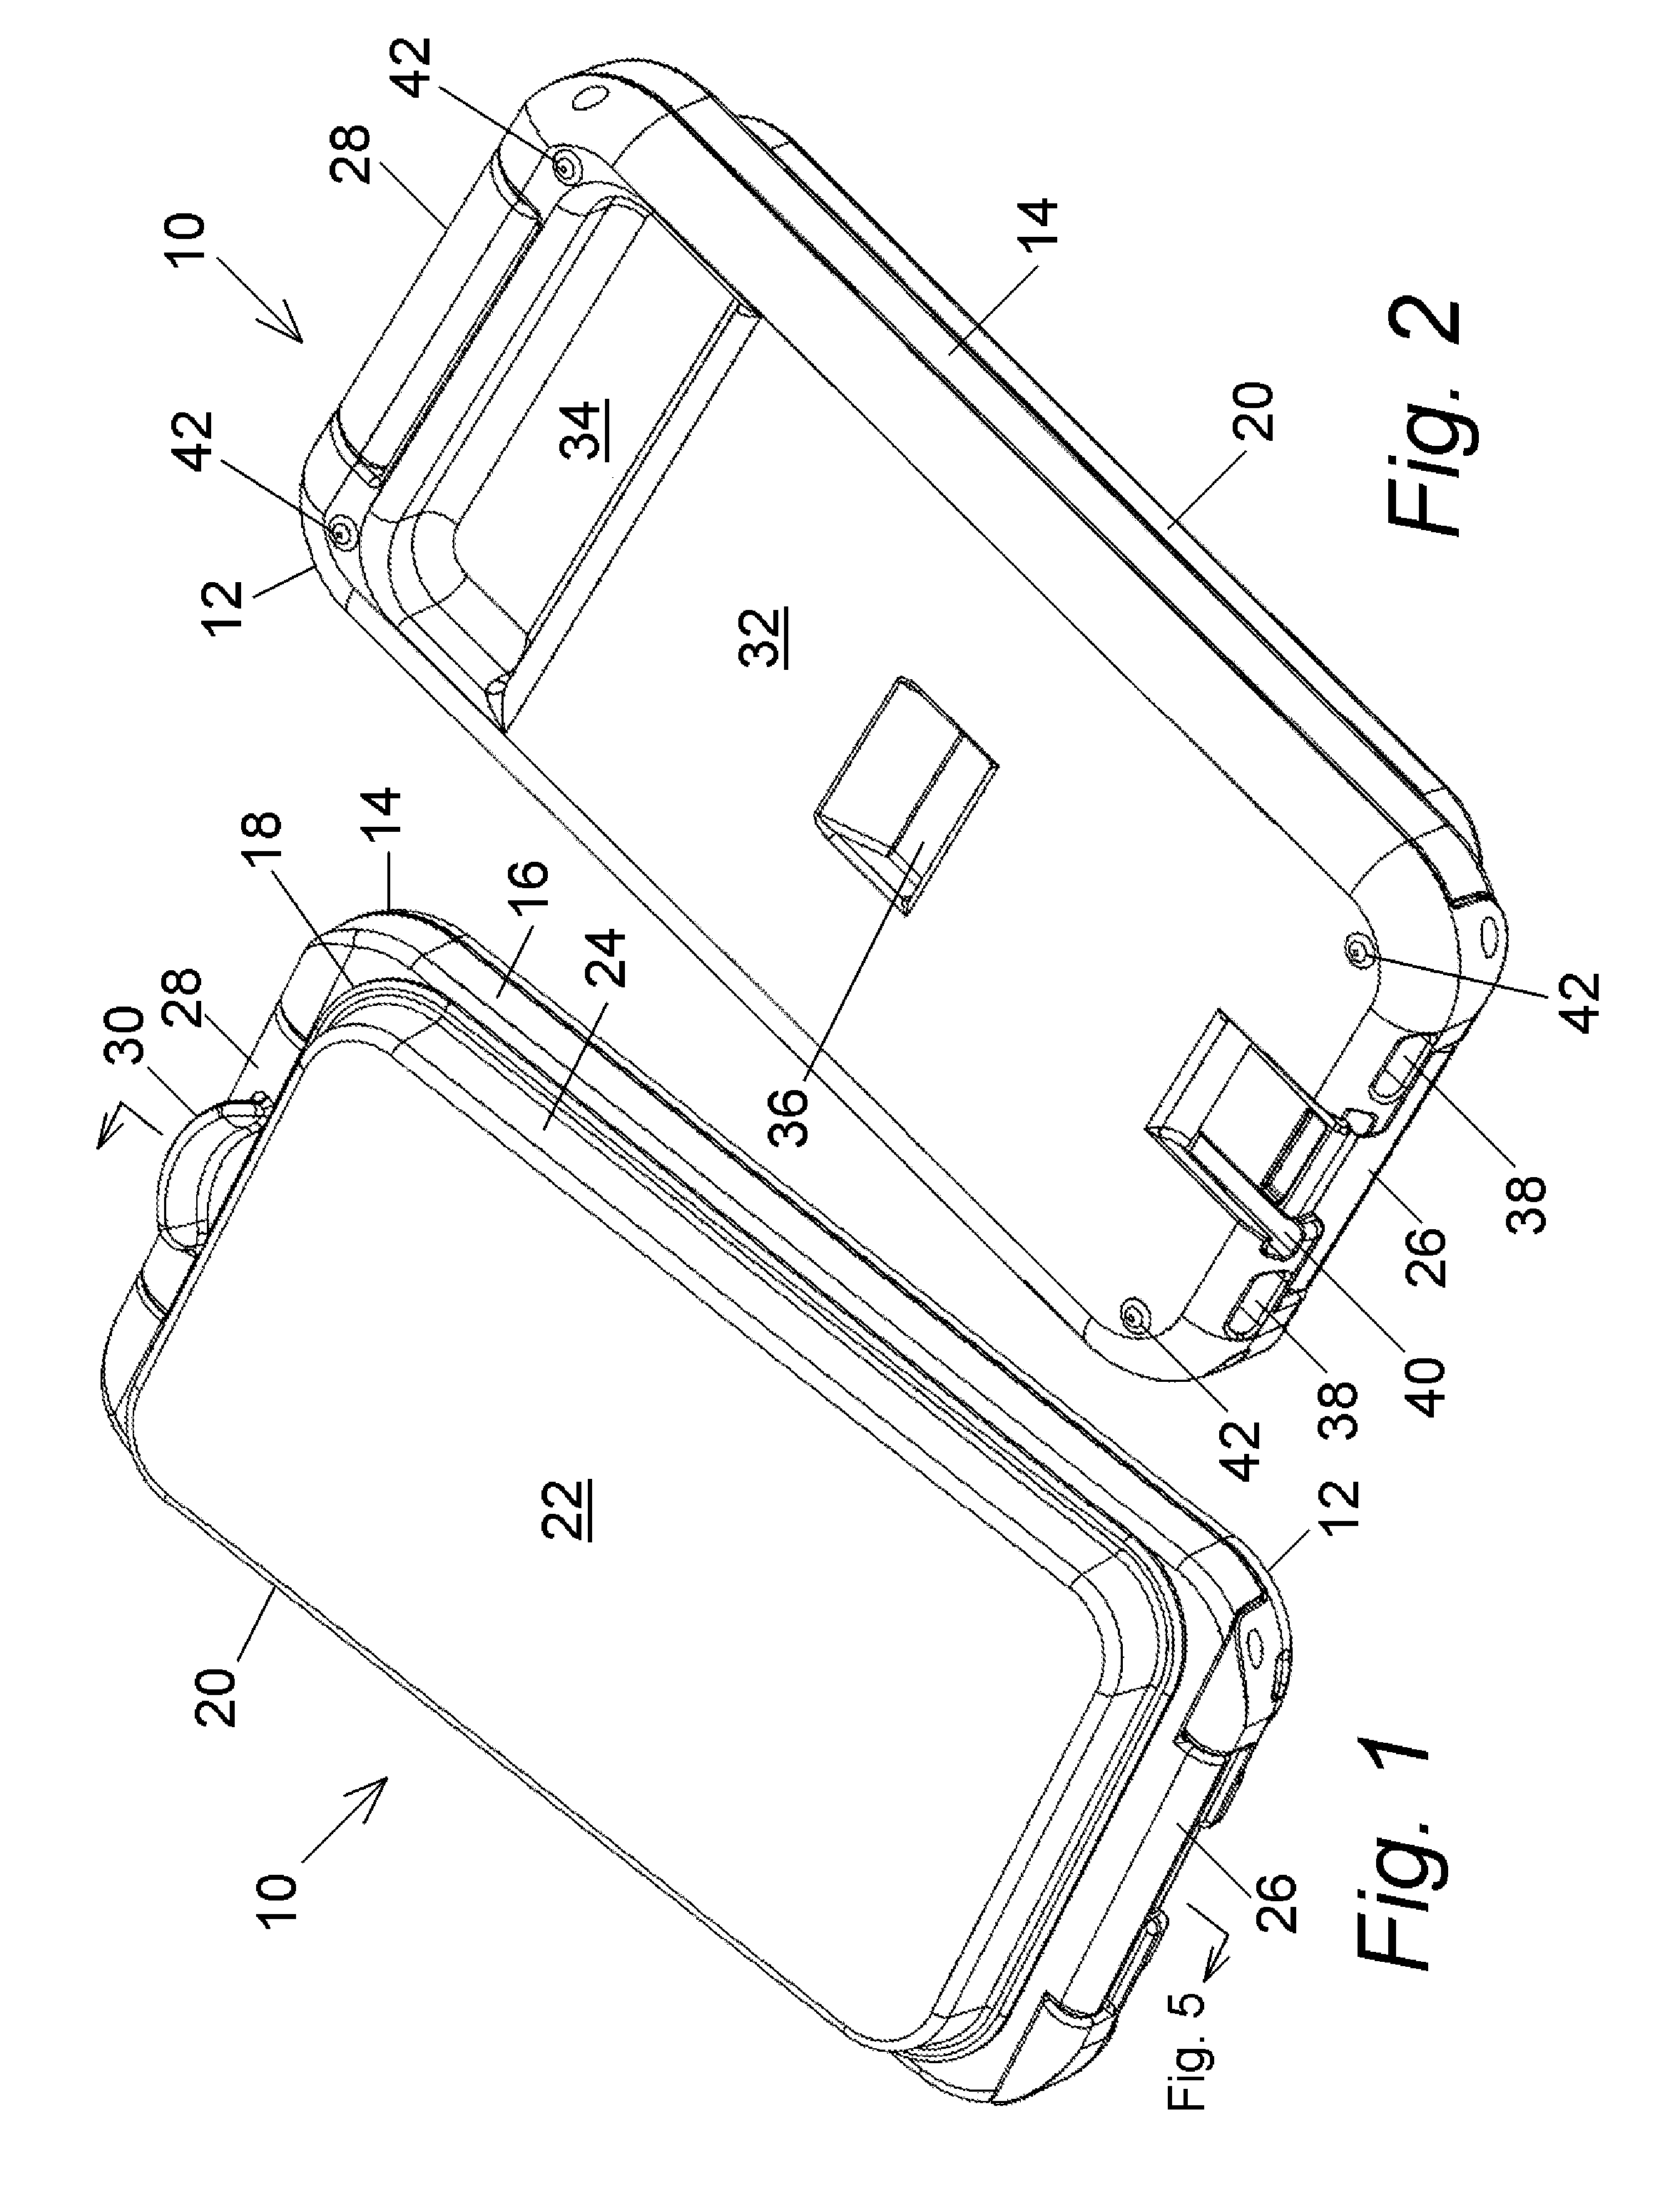 Protective enclosure for touch screen device